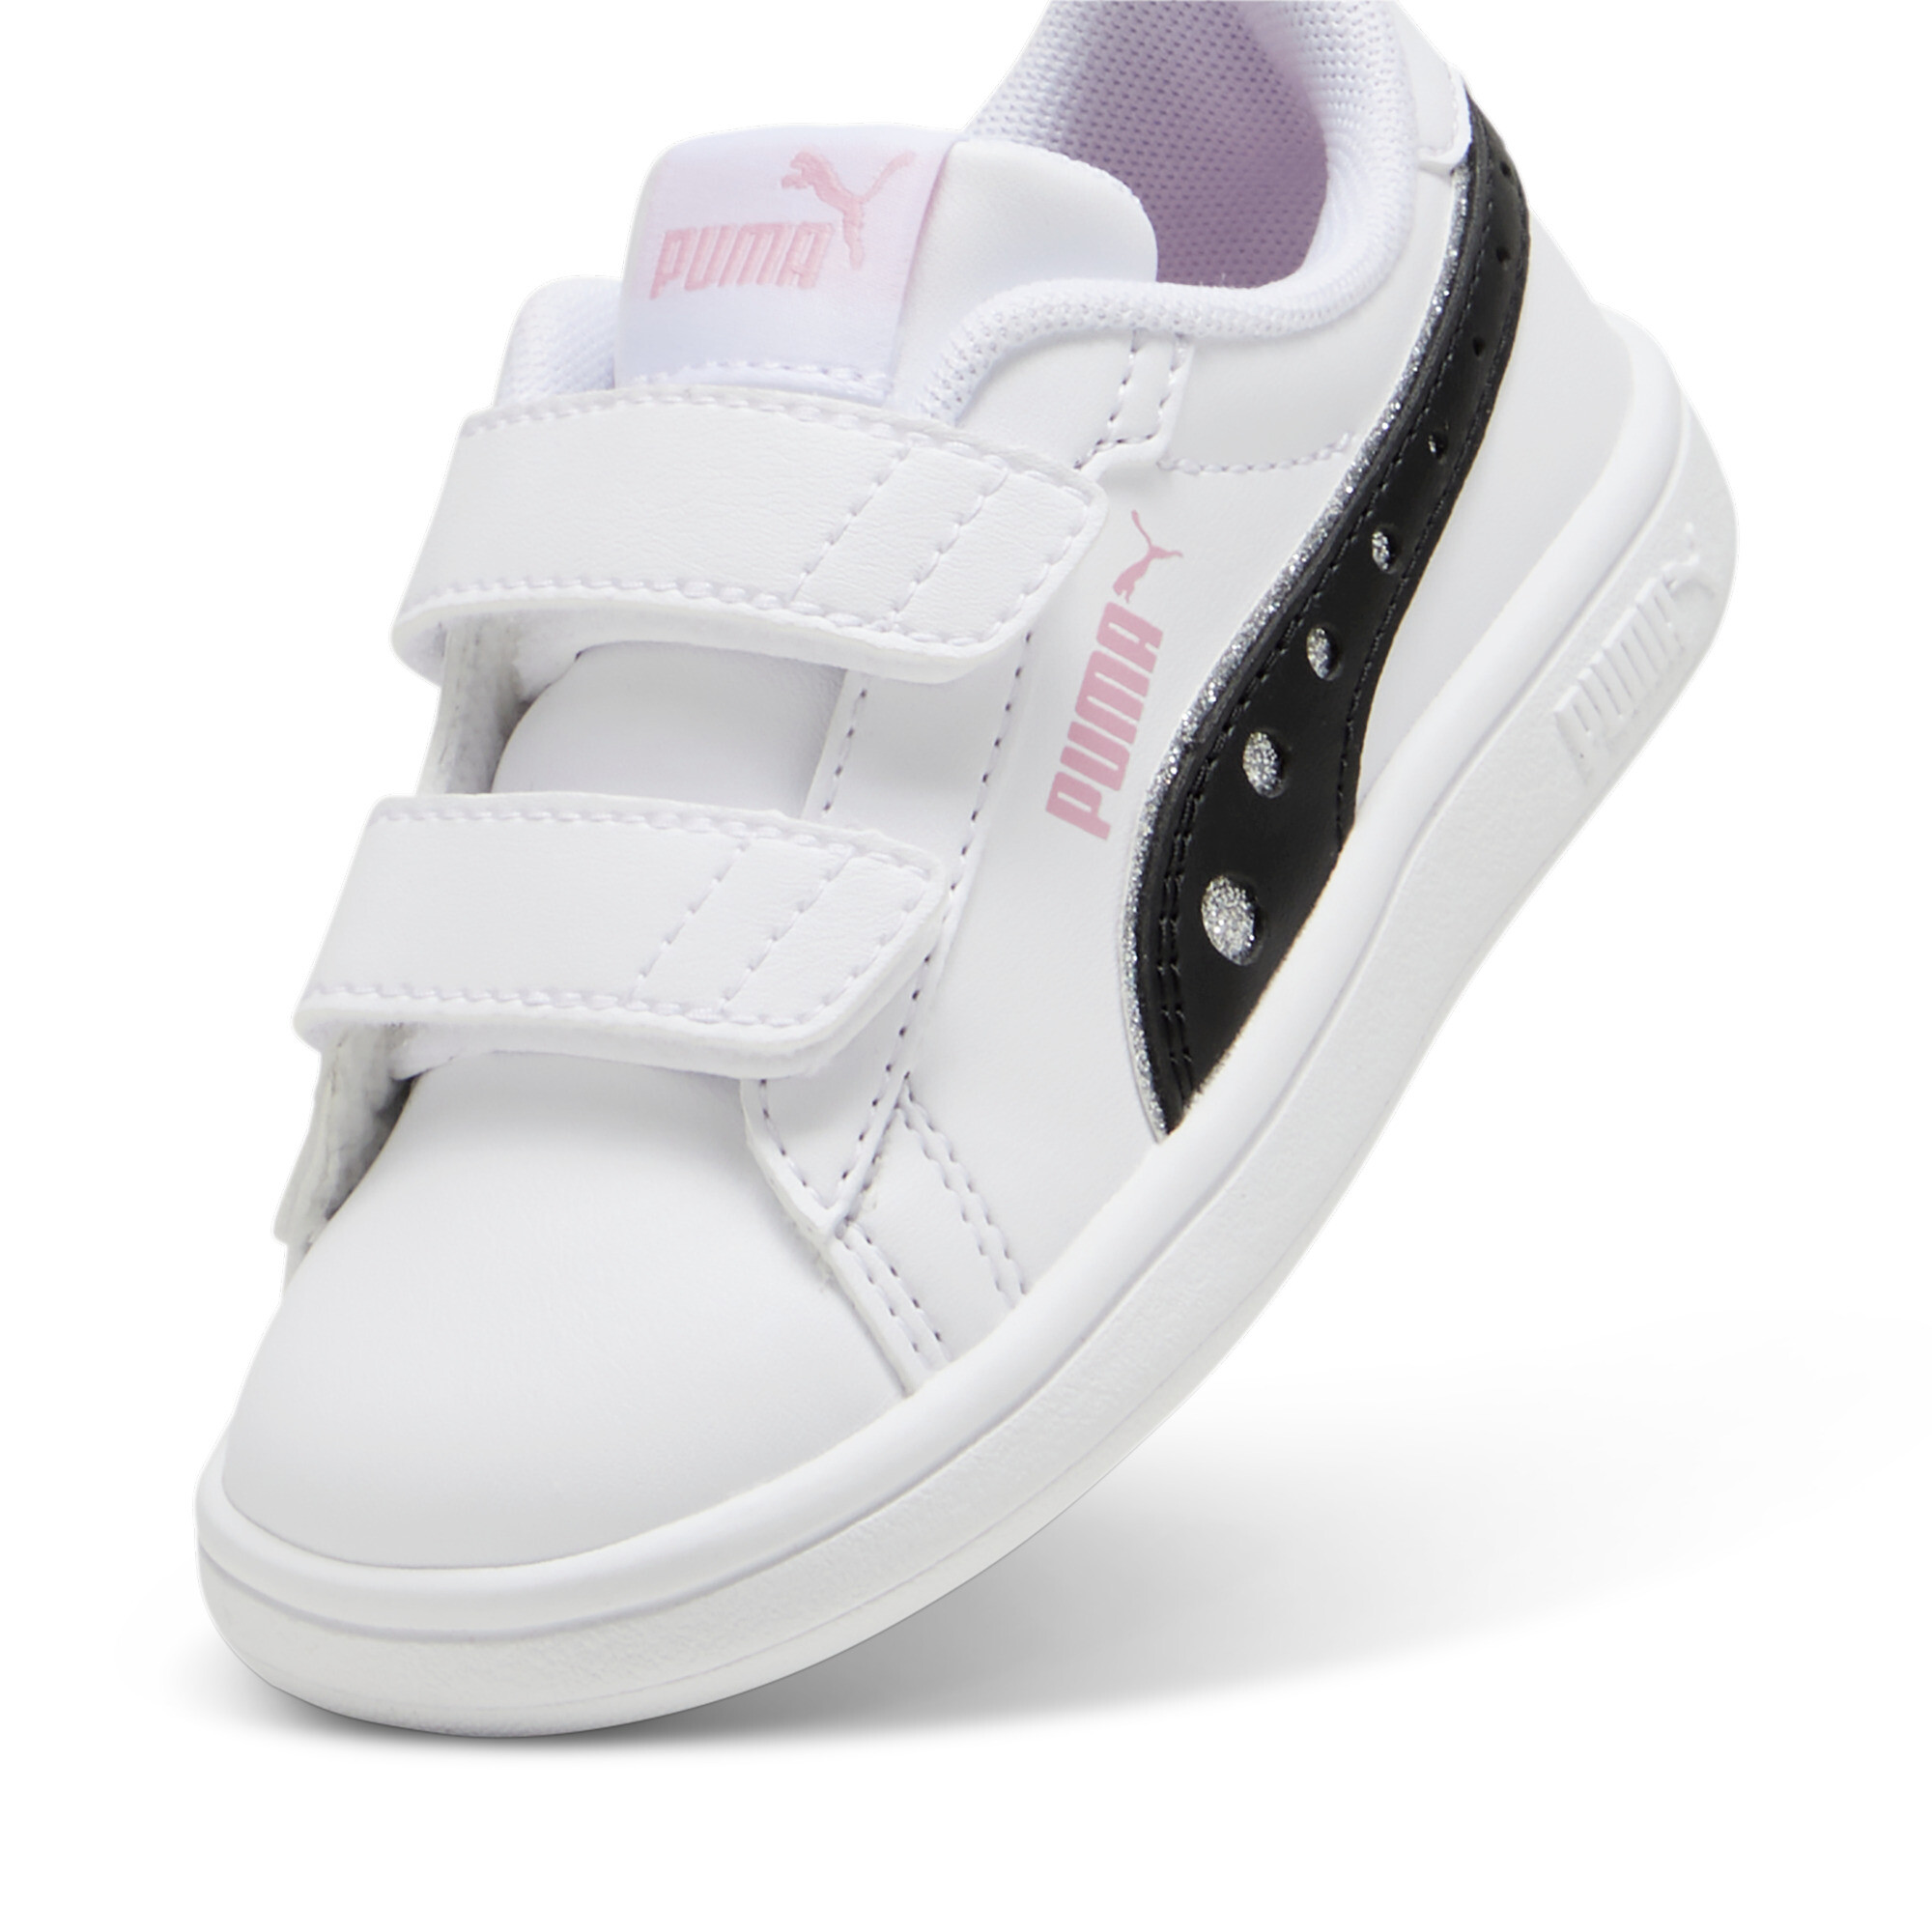 Puma Smash 3.0 Dance Party Toddlers' Sneakers, White, Size 19, Shoes